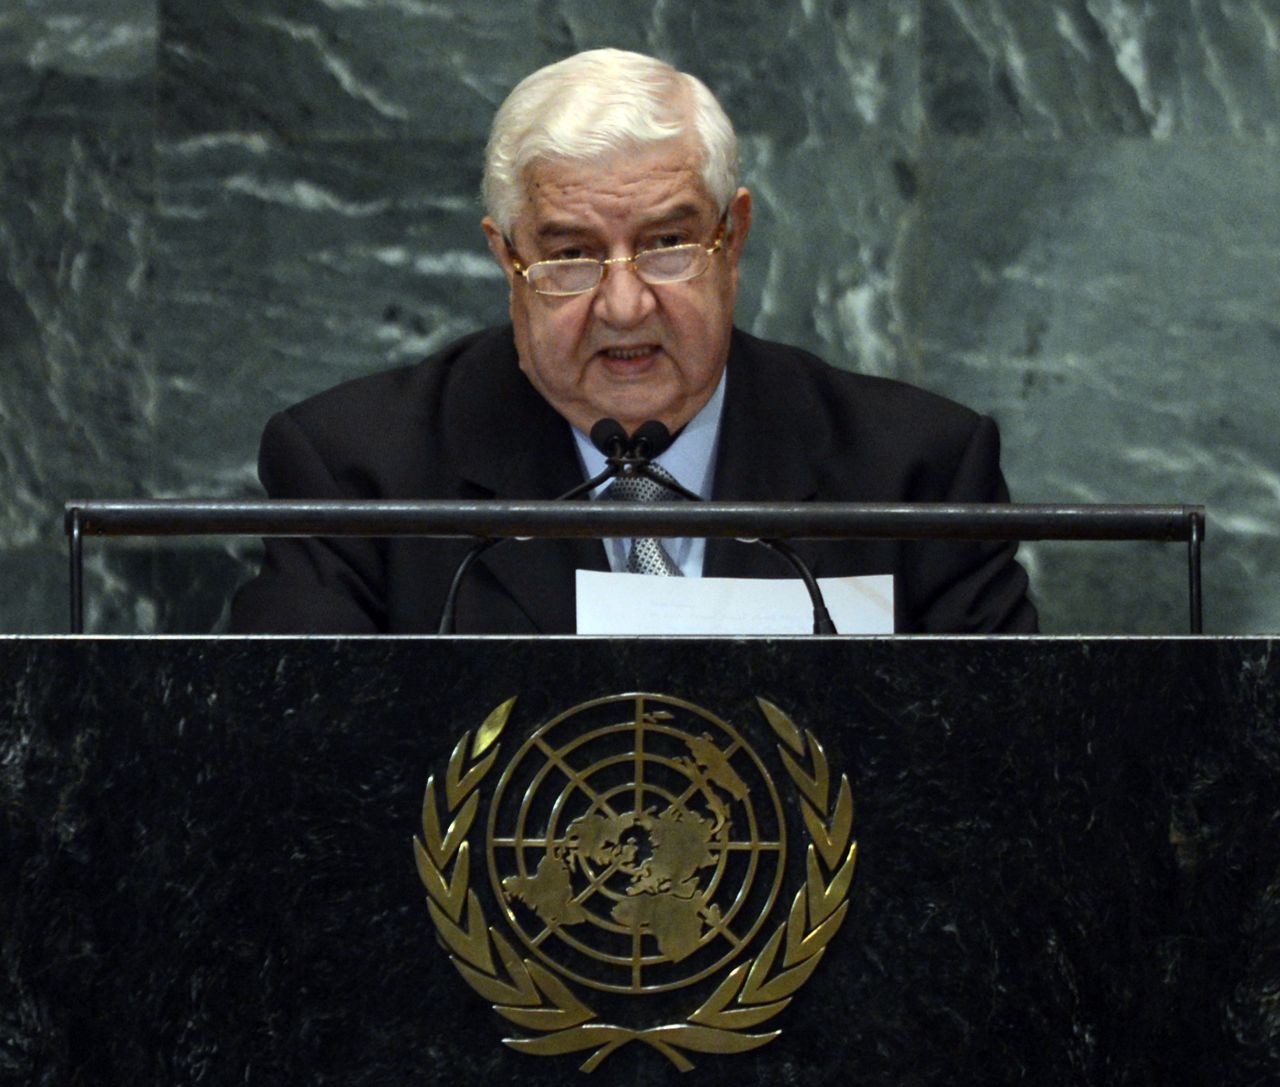 Syrian Foreign Minister Walid Moallem speaks during the 67th session of the United Nations General Assembly at the U.N. headquarters in New York on Monday, October 1. The event unites more than 100 heads of state and government for high-level meetings on nuclear safety, regional conflicts, health and nutrition and environment issues.